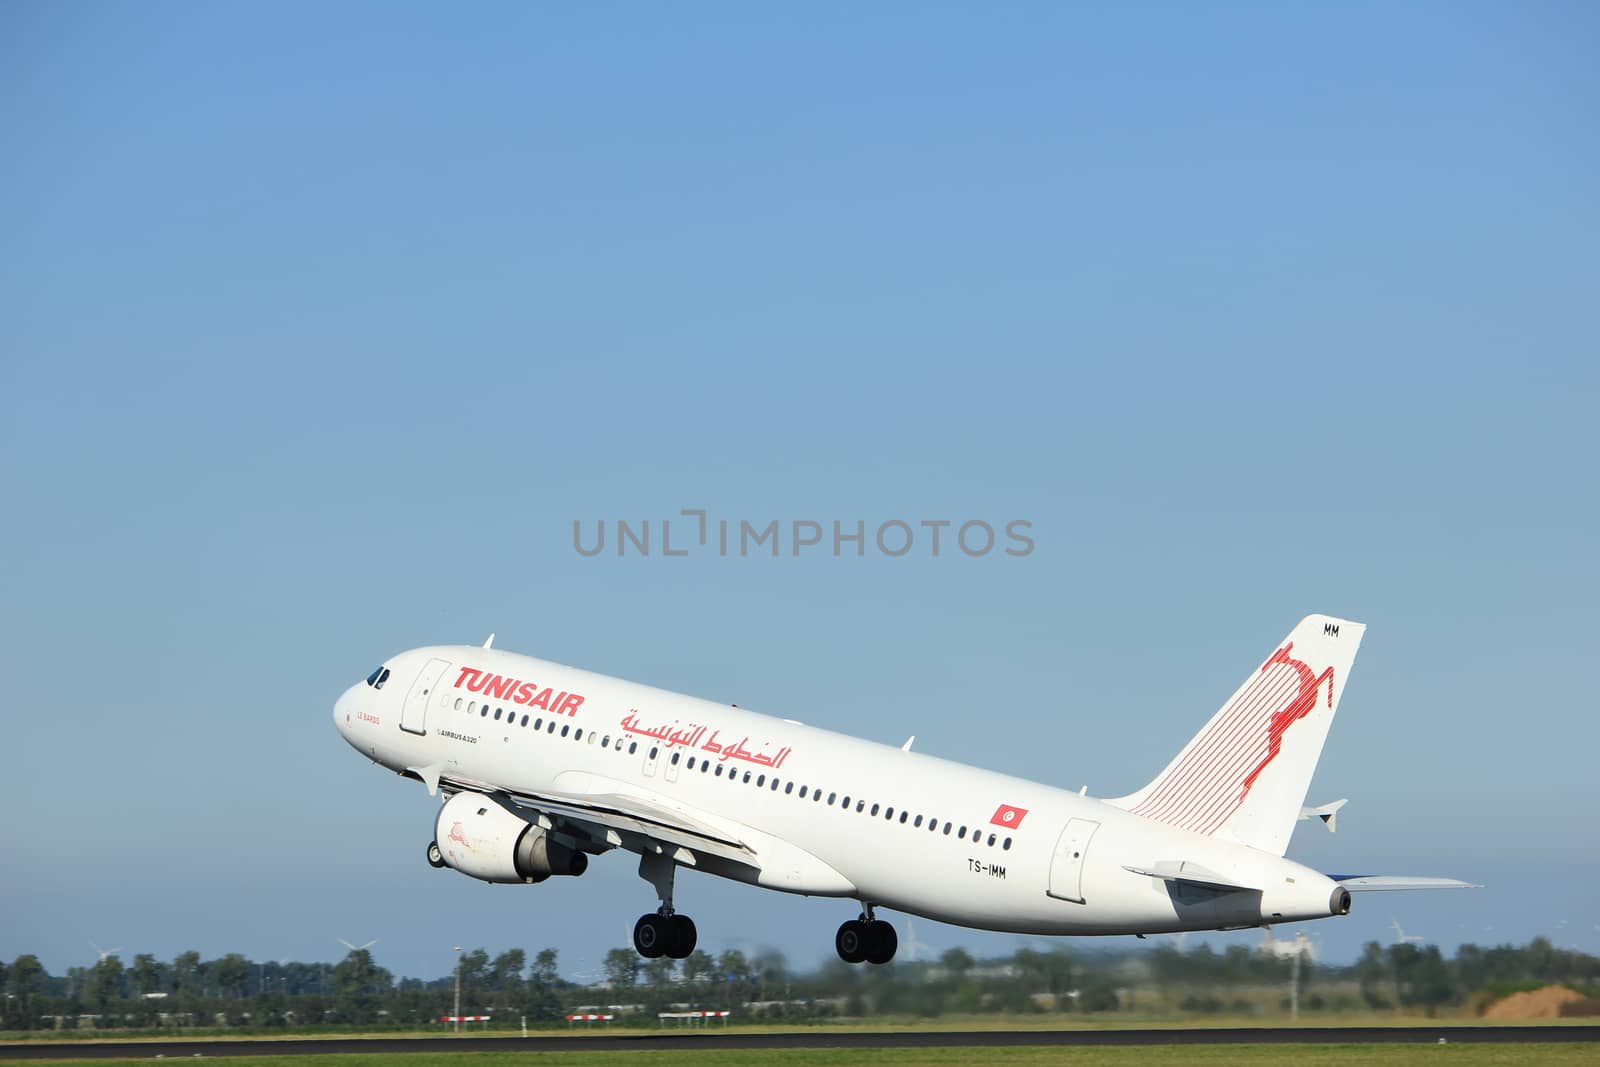 Amsterdam, the Netherlands  - August, 18th 2016: TS-IMM Tunisair Airbus A320-211 
taking off from Polderbaan Runway Amsterdam Airport Schiphol